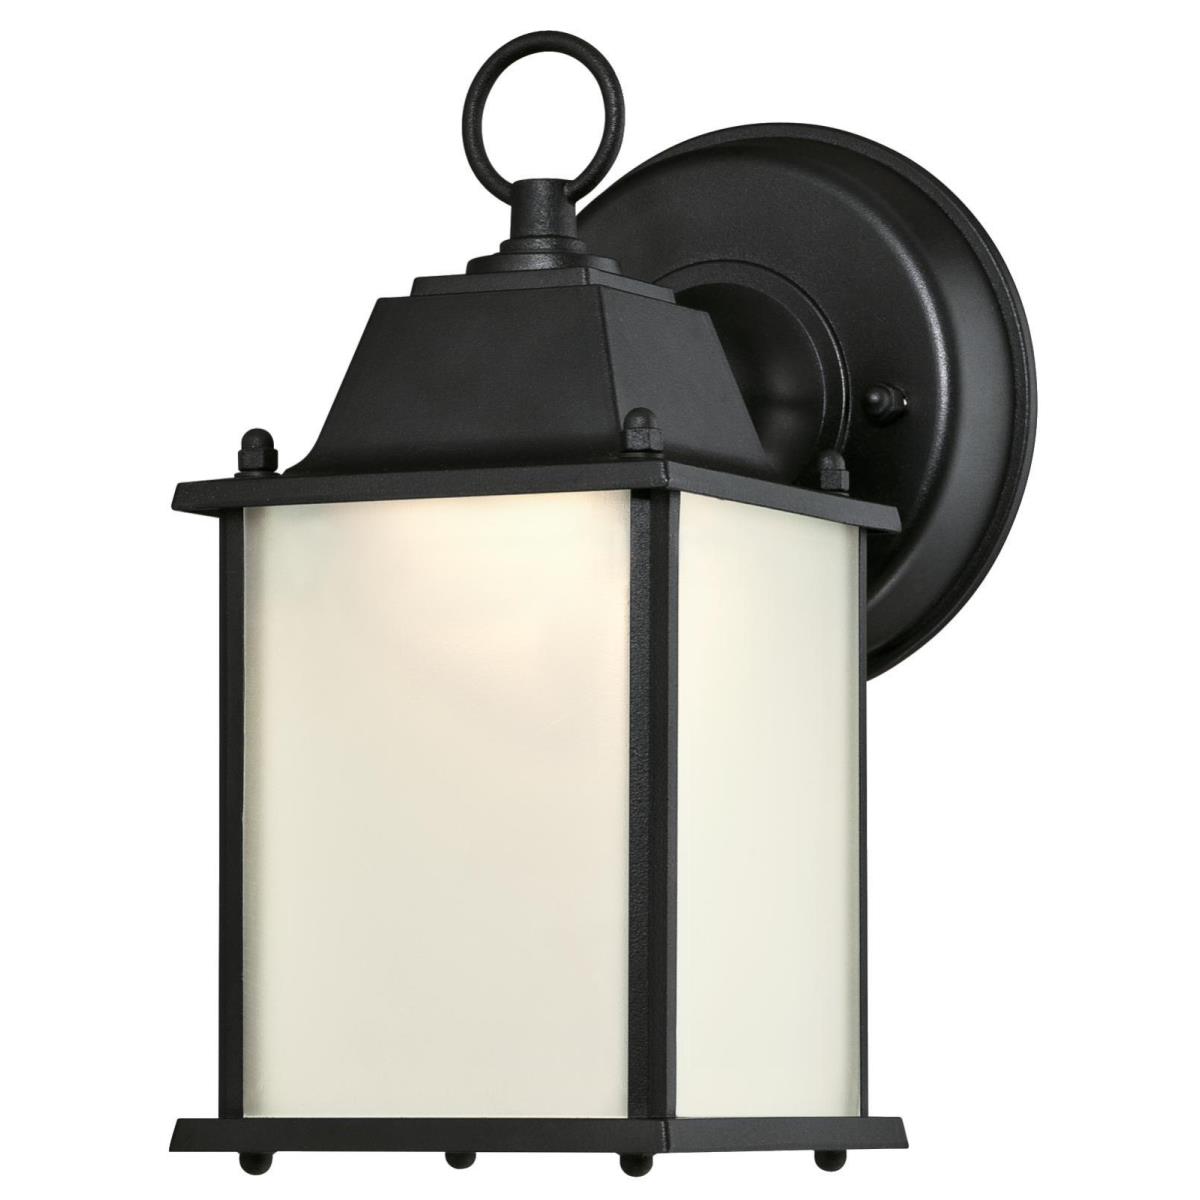 1 Light LED Wall Fixture Textured Black Finish with Frosted Glass